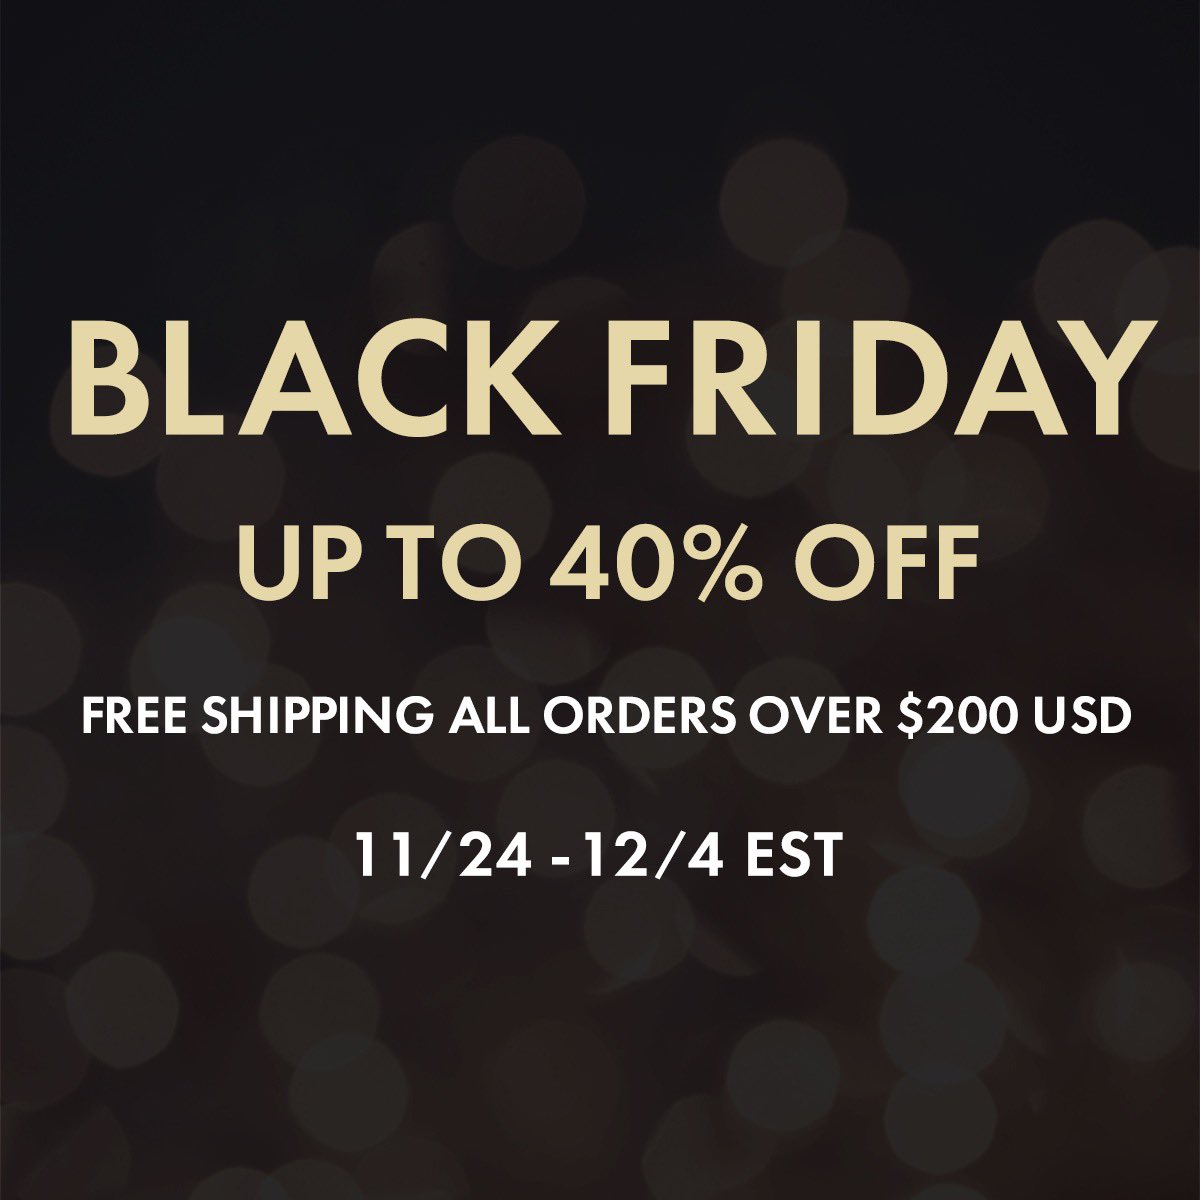 We are offering a Black Friday Sale! The sale will be from November 24th (THURS) 12am to December 4th (SUN) 11:59 PM (EST) Other collections such as ties, ladies` wear, outerwear, and accessories are also up to 40% OFF.